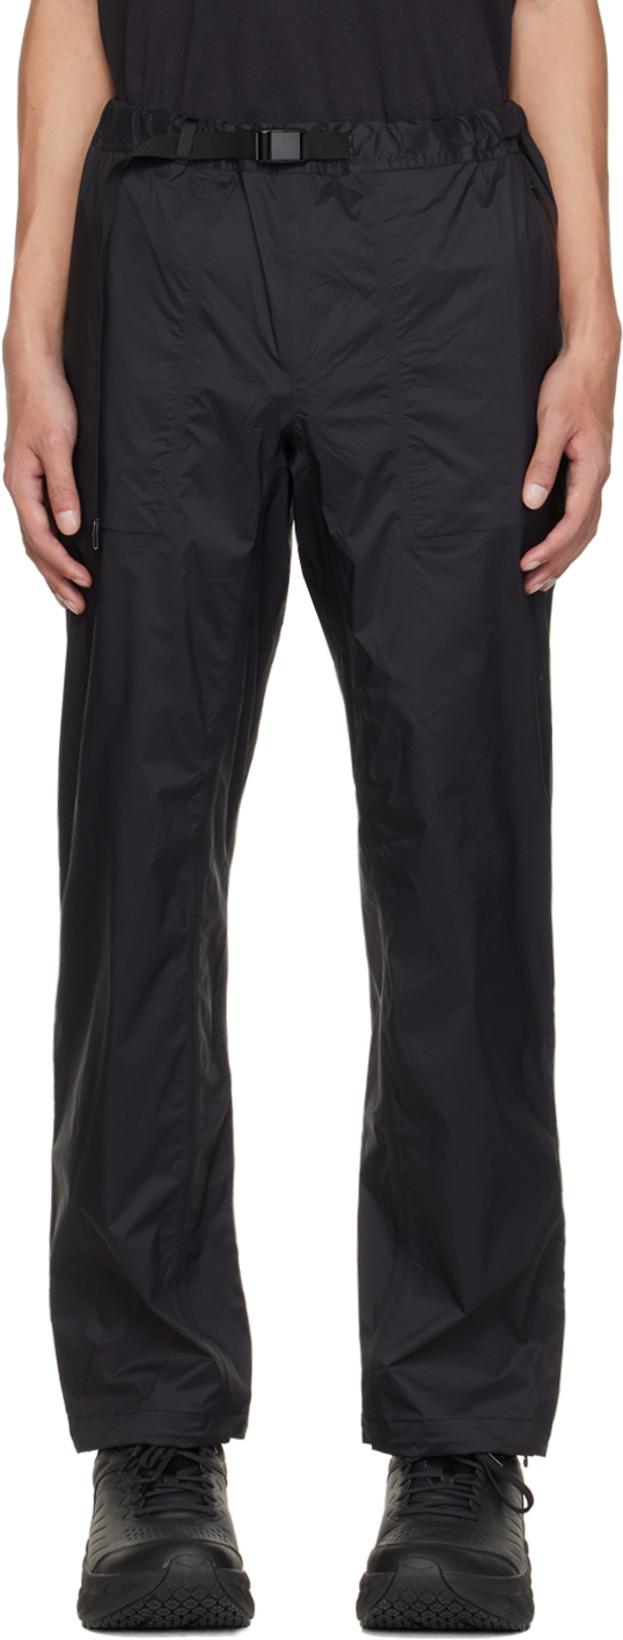 Black 2.5L Trousers by CAYL